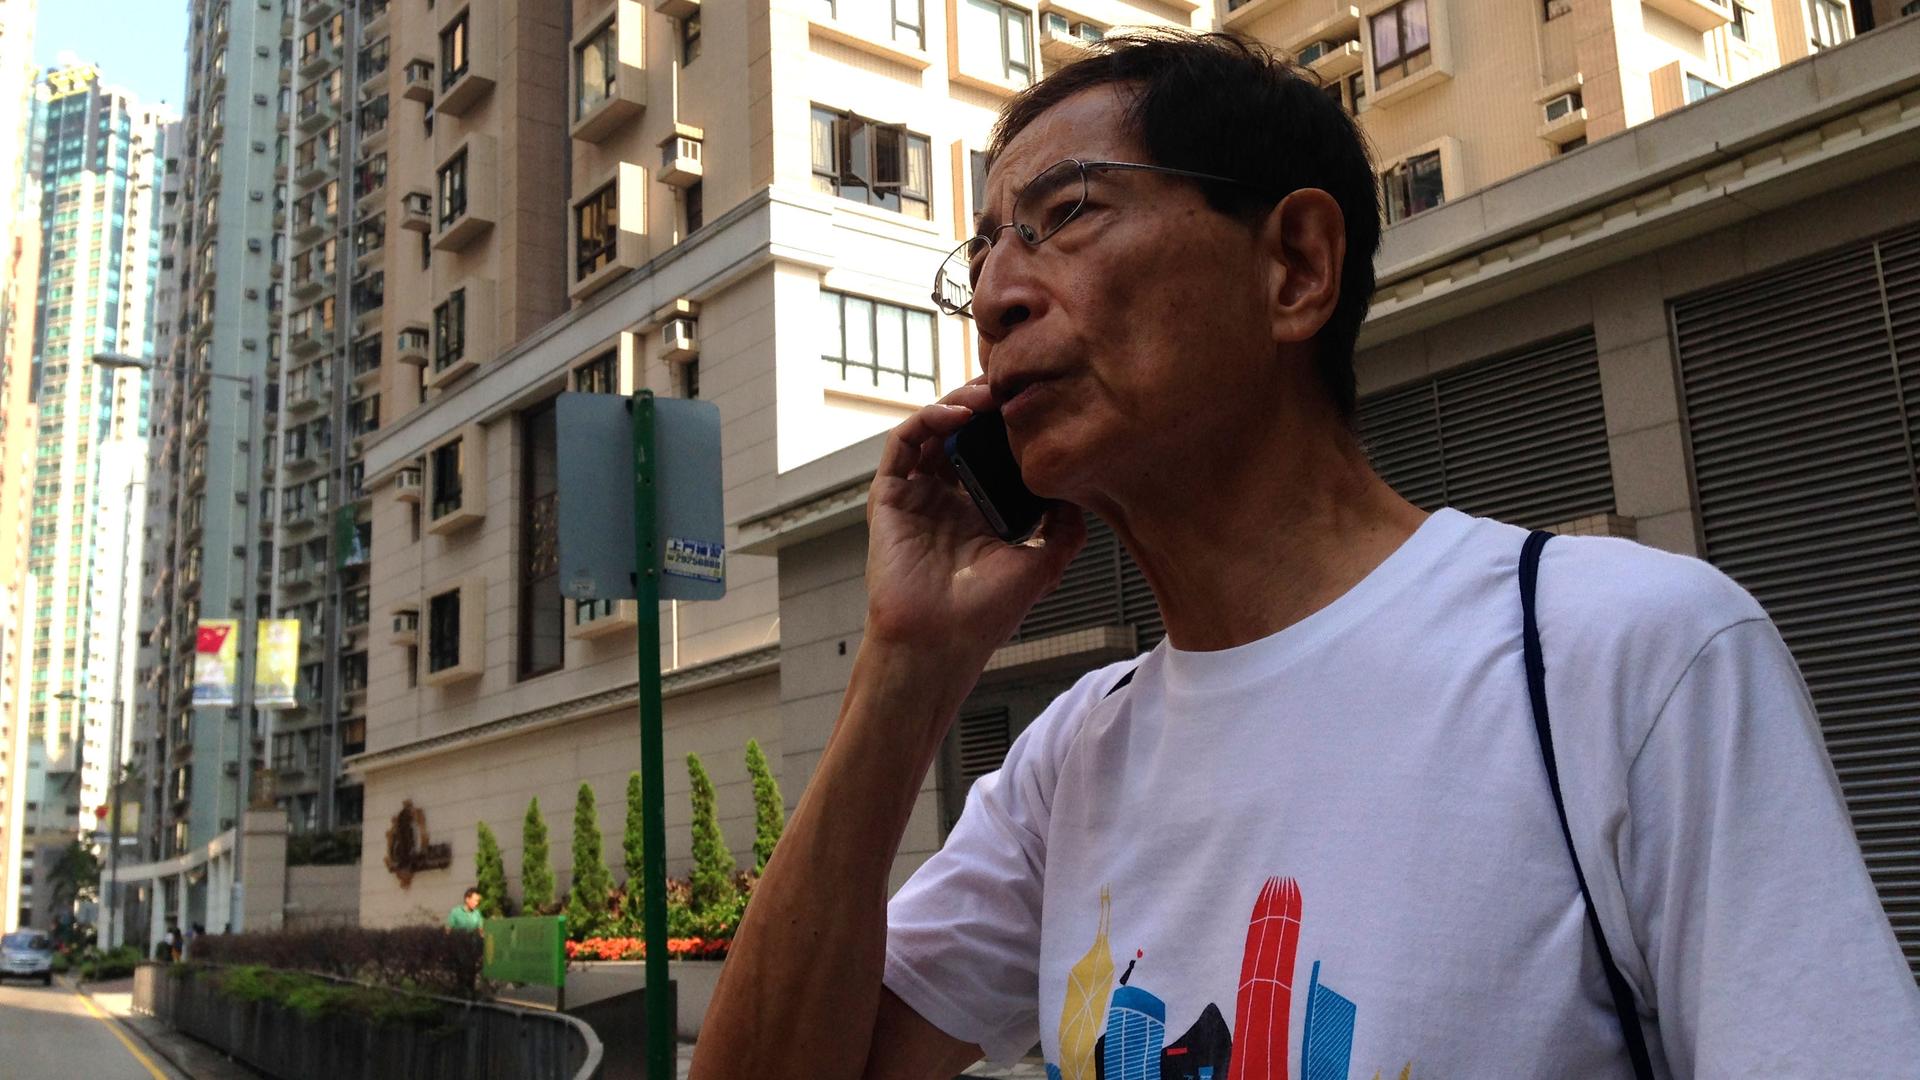 Martin Lee is a 76 year-old Hong Kong lawyer and verteran pro-democracy activist. He says it’s up to Beijing to compromise by giving the Chinese territory the right to elect its own top leader.